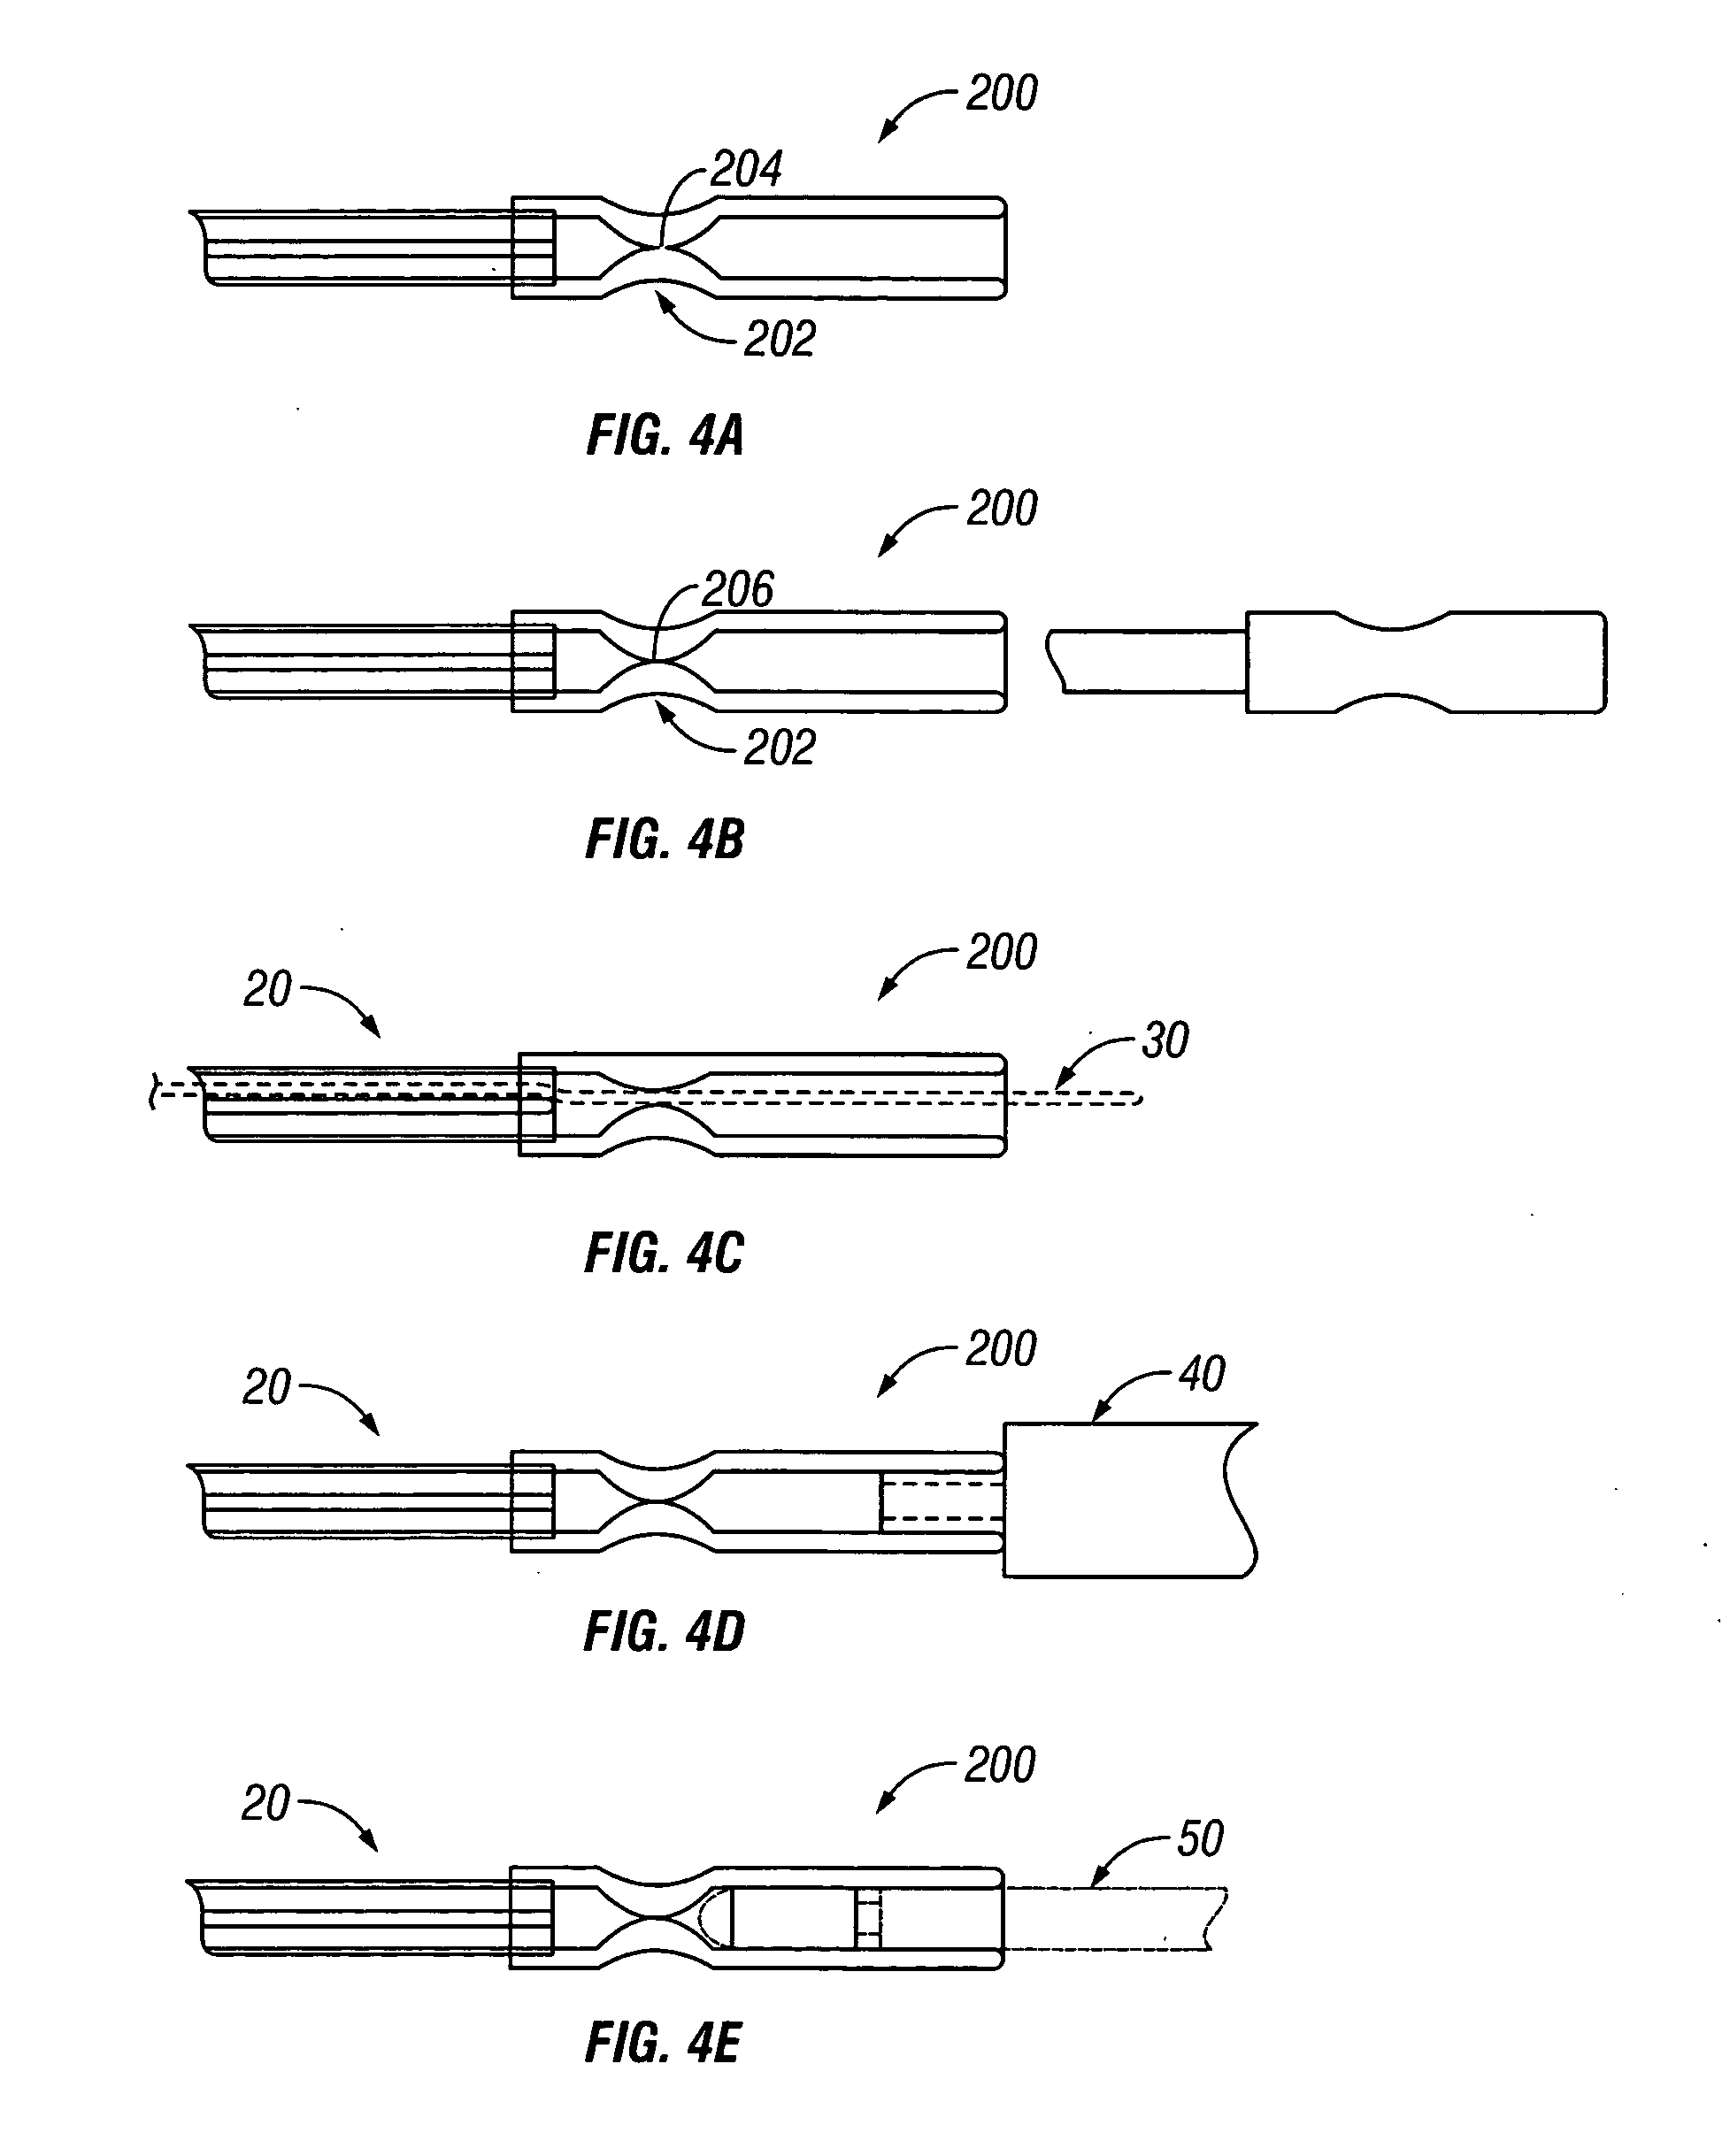 Multifunction adaptor for an open-ended catheter